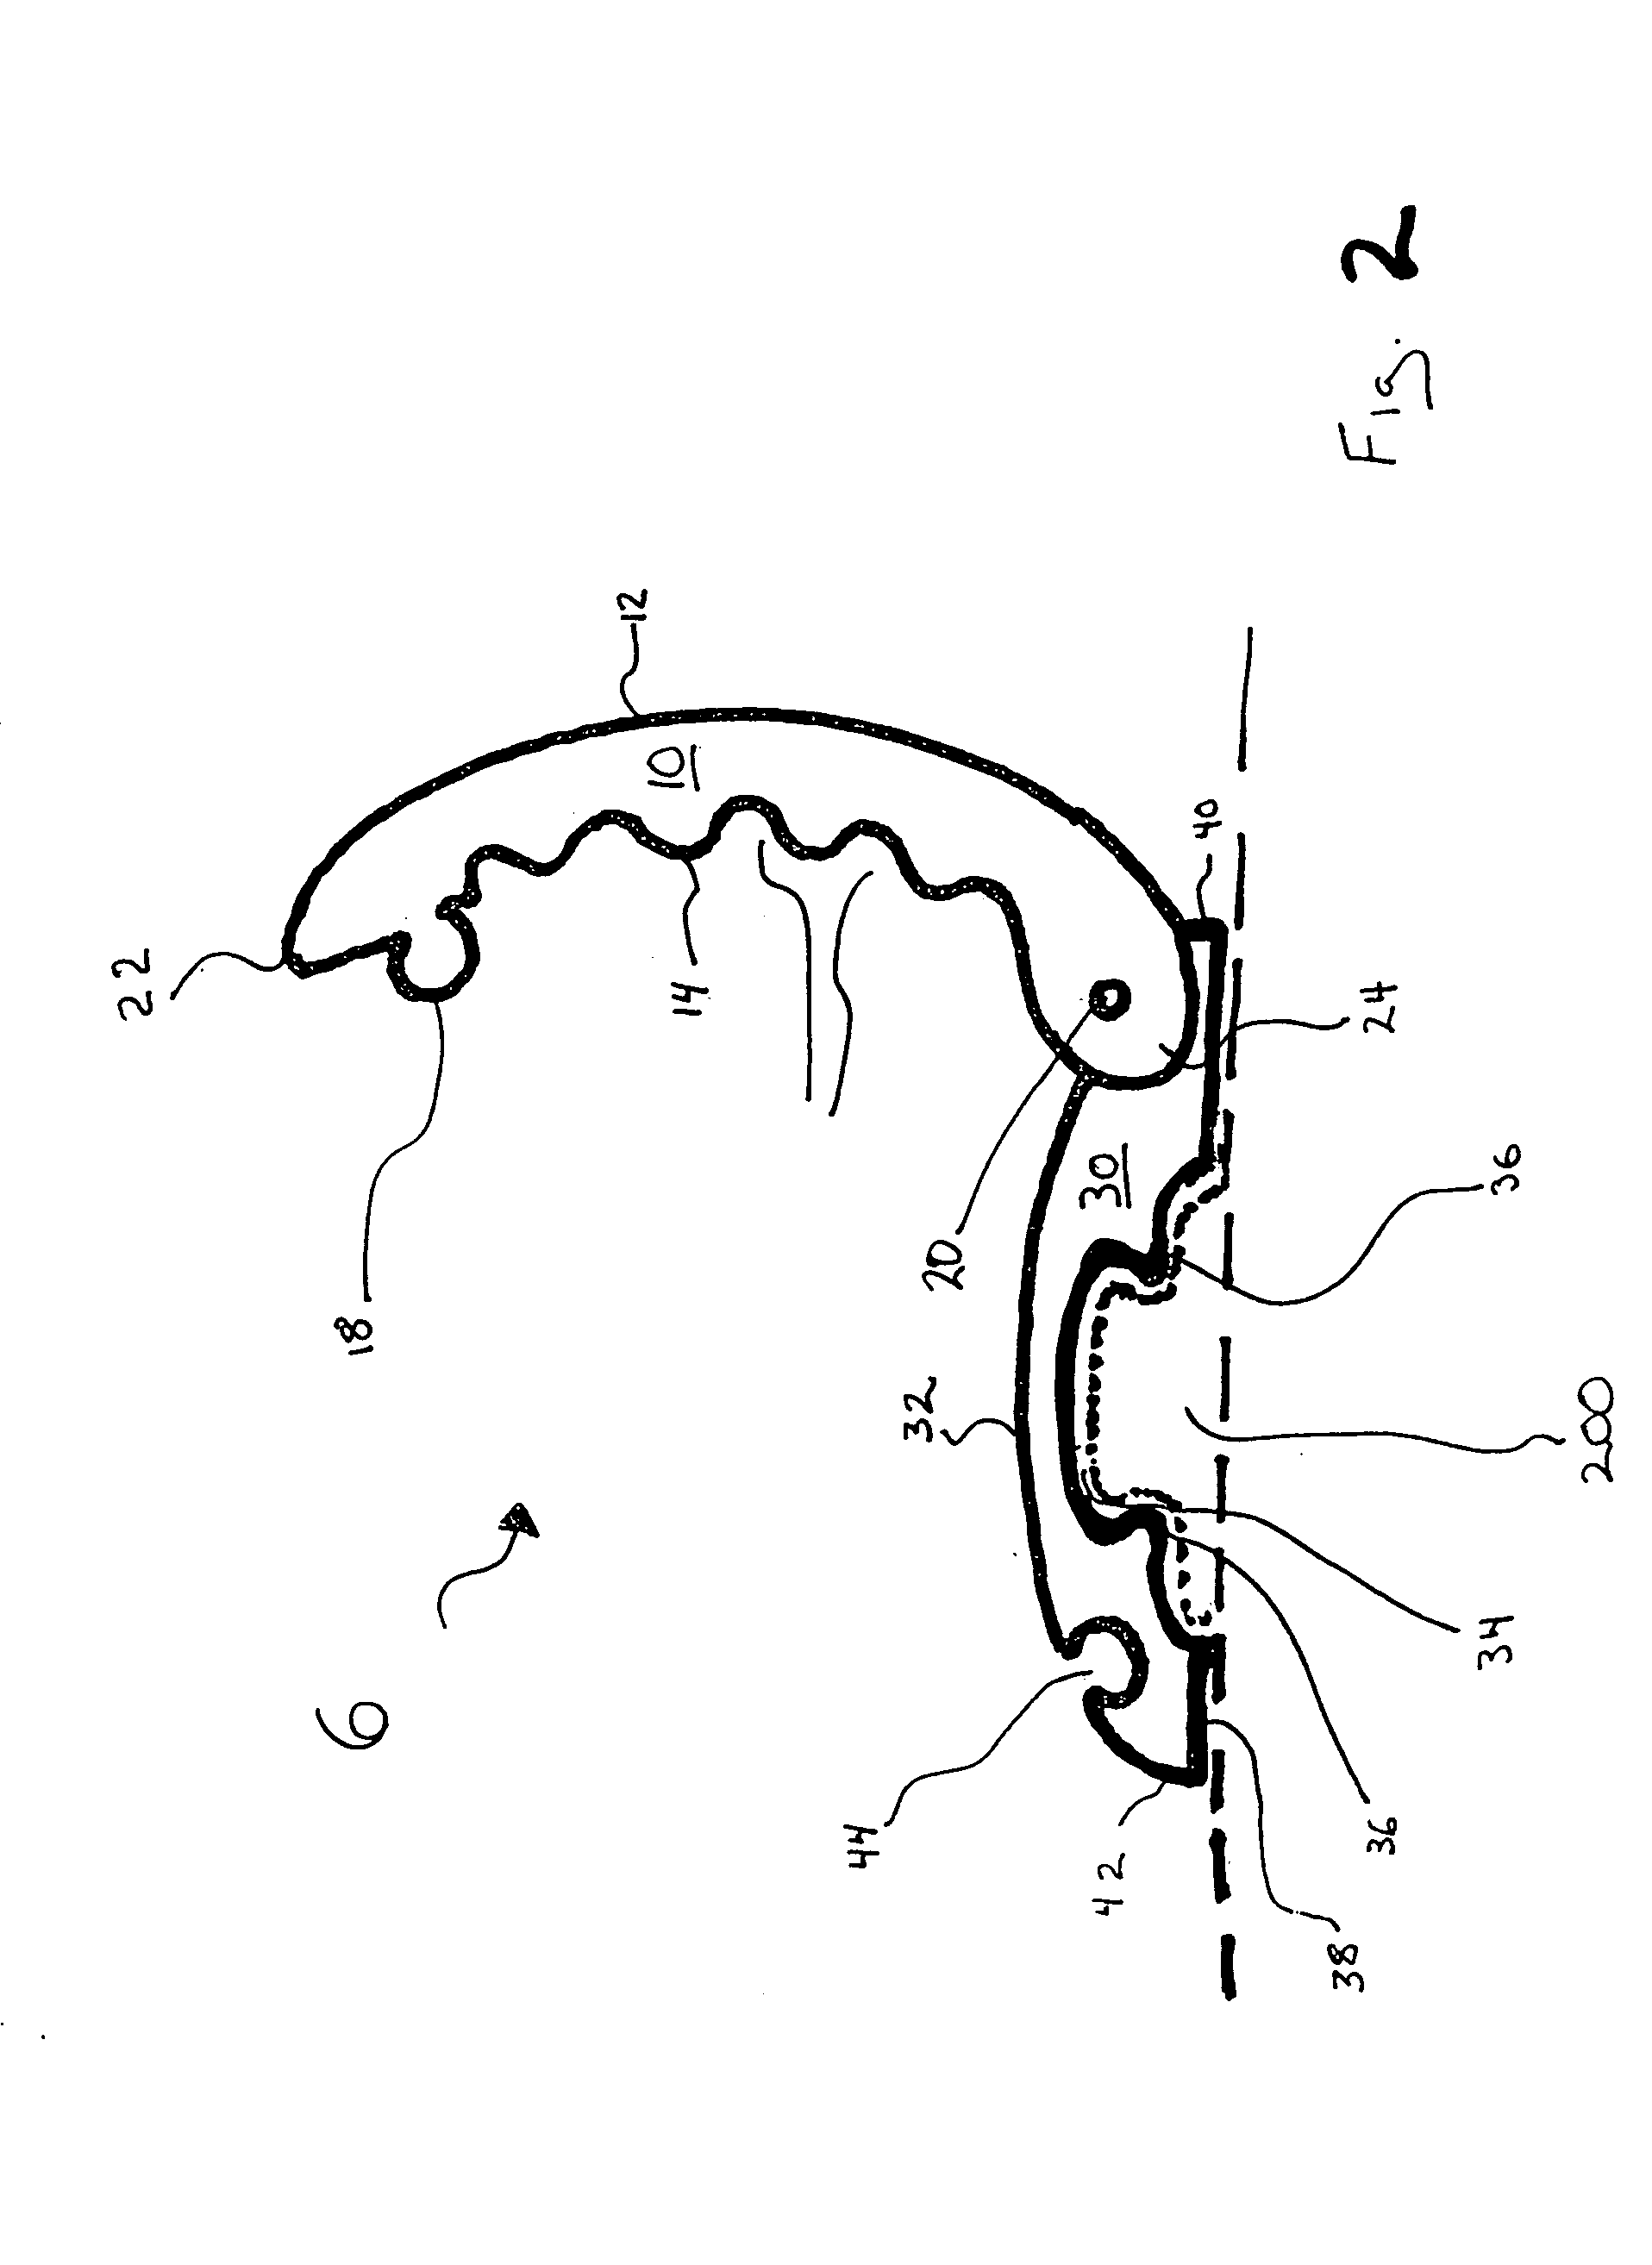 Variable tension fastening system for vehicle covers